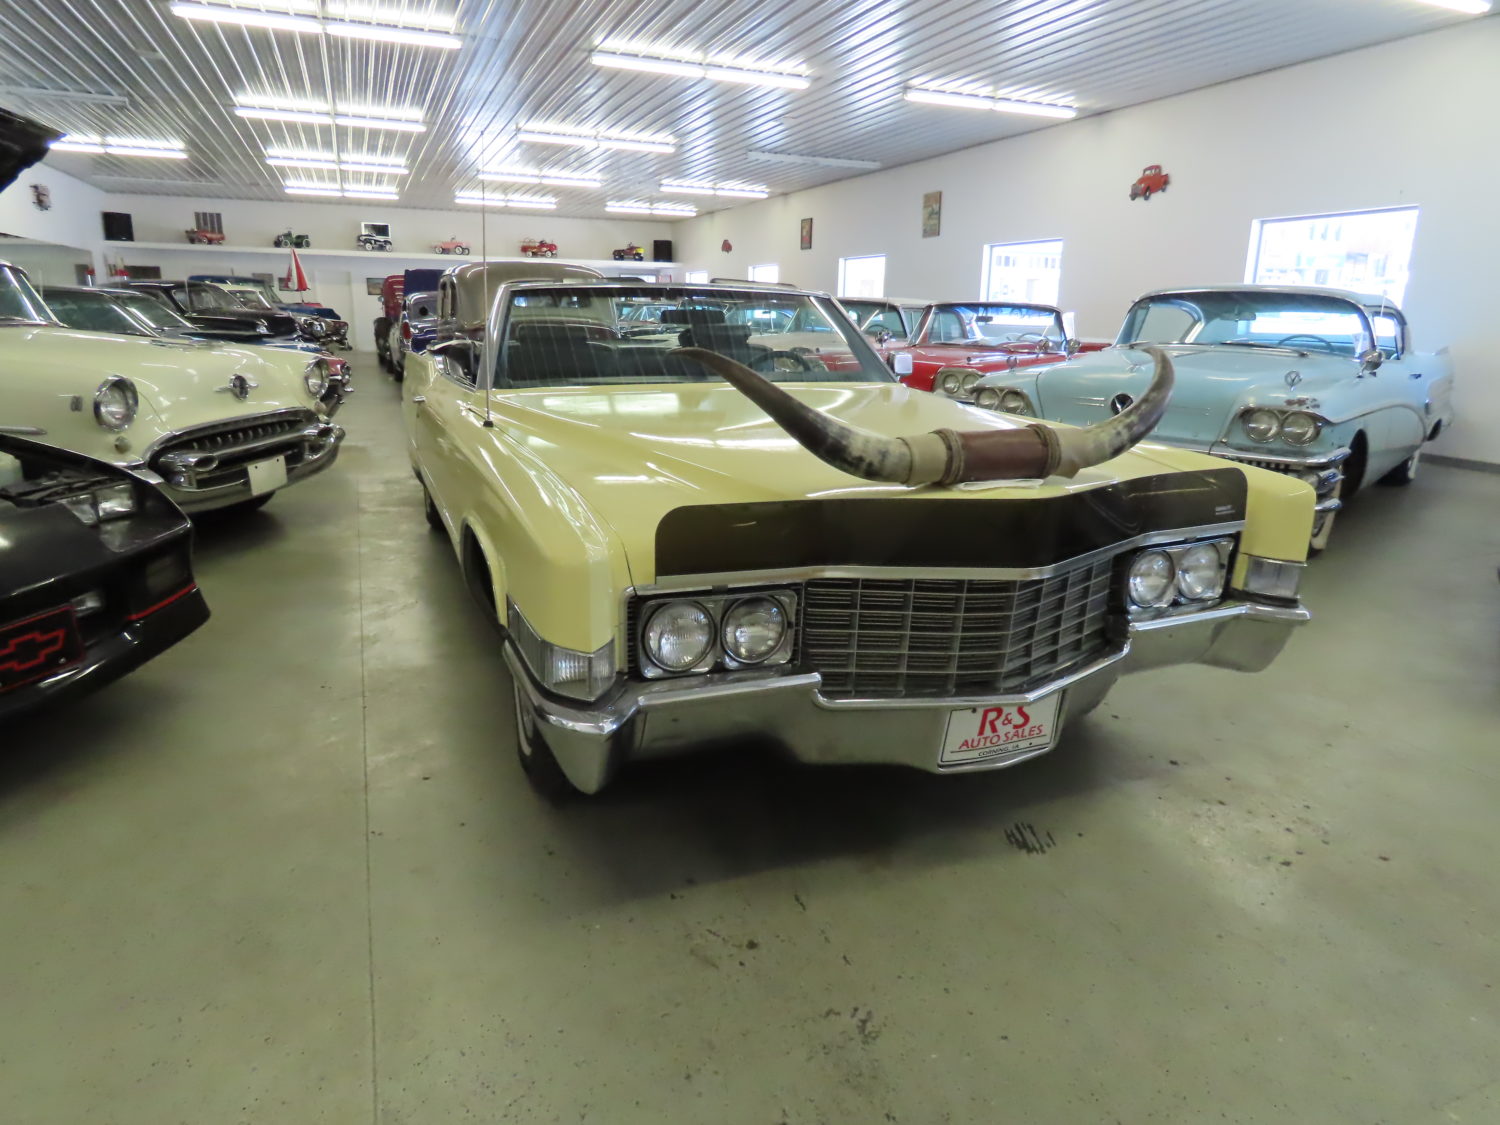 Approx. 100 American Classics Cars At Auction! The Sorensen Collection-LIVE ONSITE W/ONLINE BIDDING!  - image 12